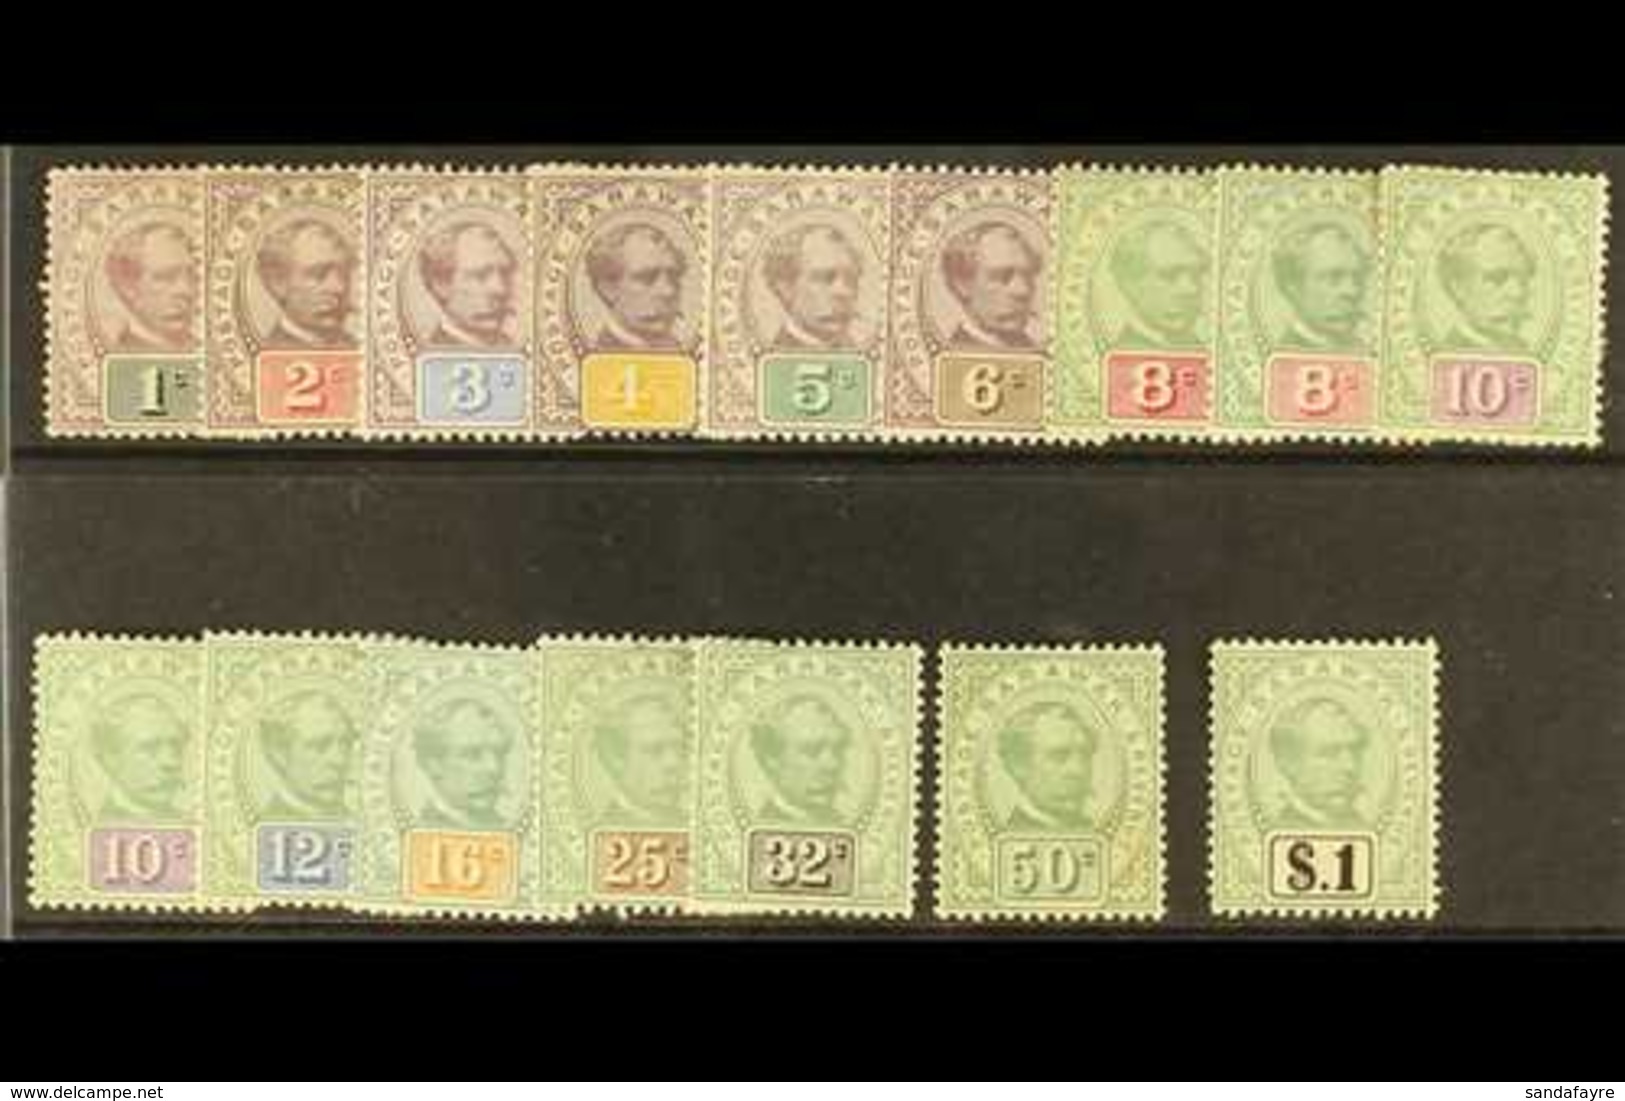 1888-97  Complete Brooke Set, SG 8/21, With Both 8c Shades, And Additional 10c Shade Mint, The 1c Without Gum, One 8c, 5 - Sarawak (...-1963)